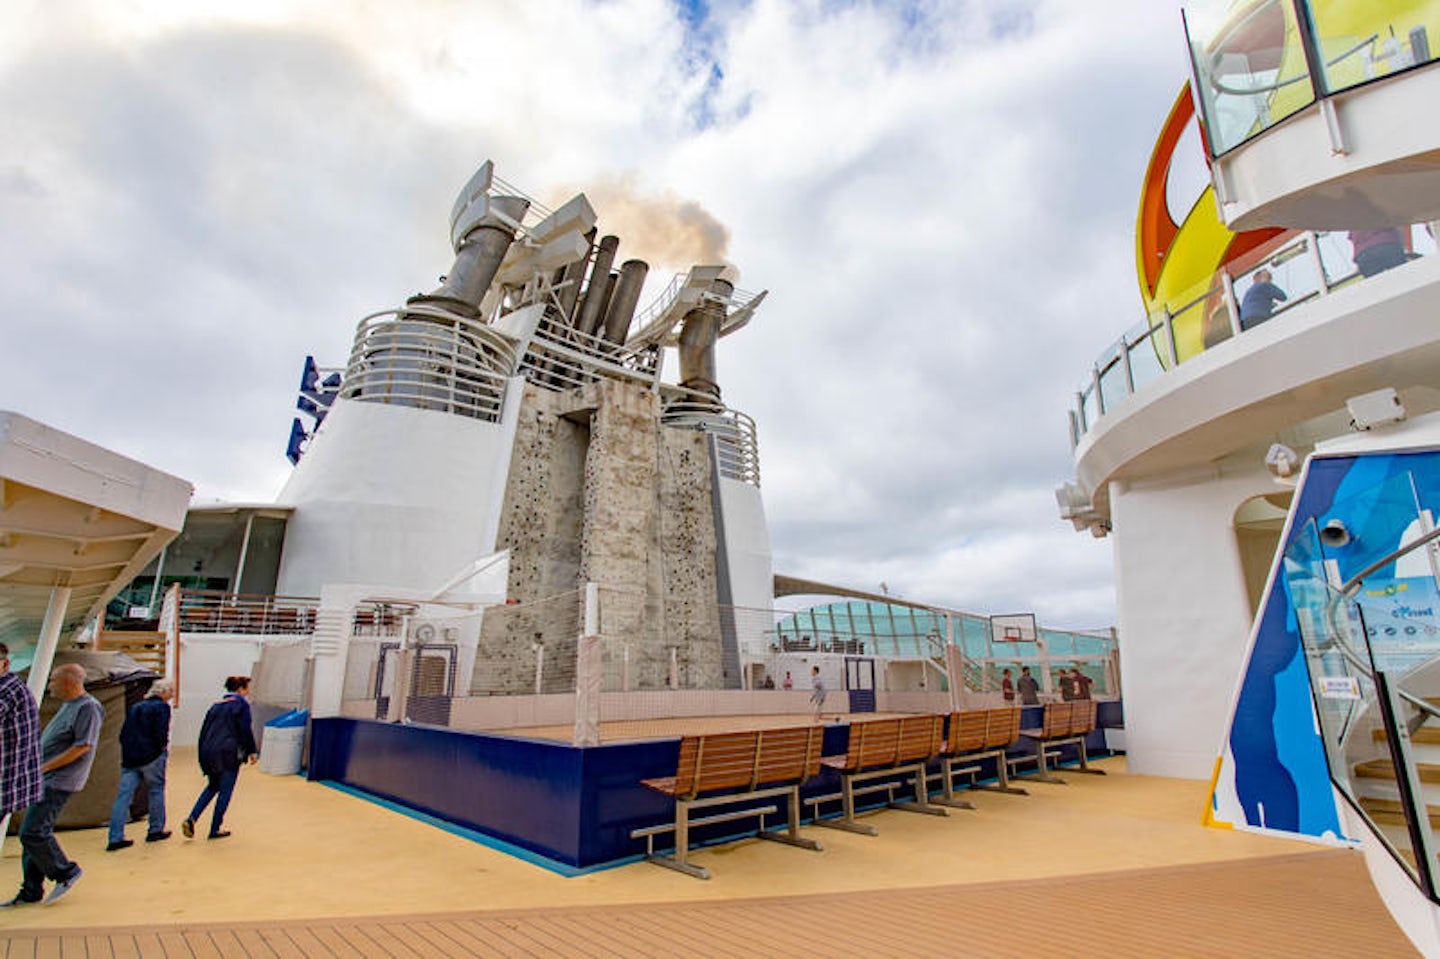 Rock Climbing Wall on Independence of the Seas